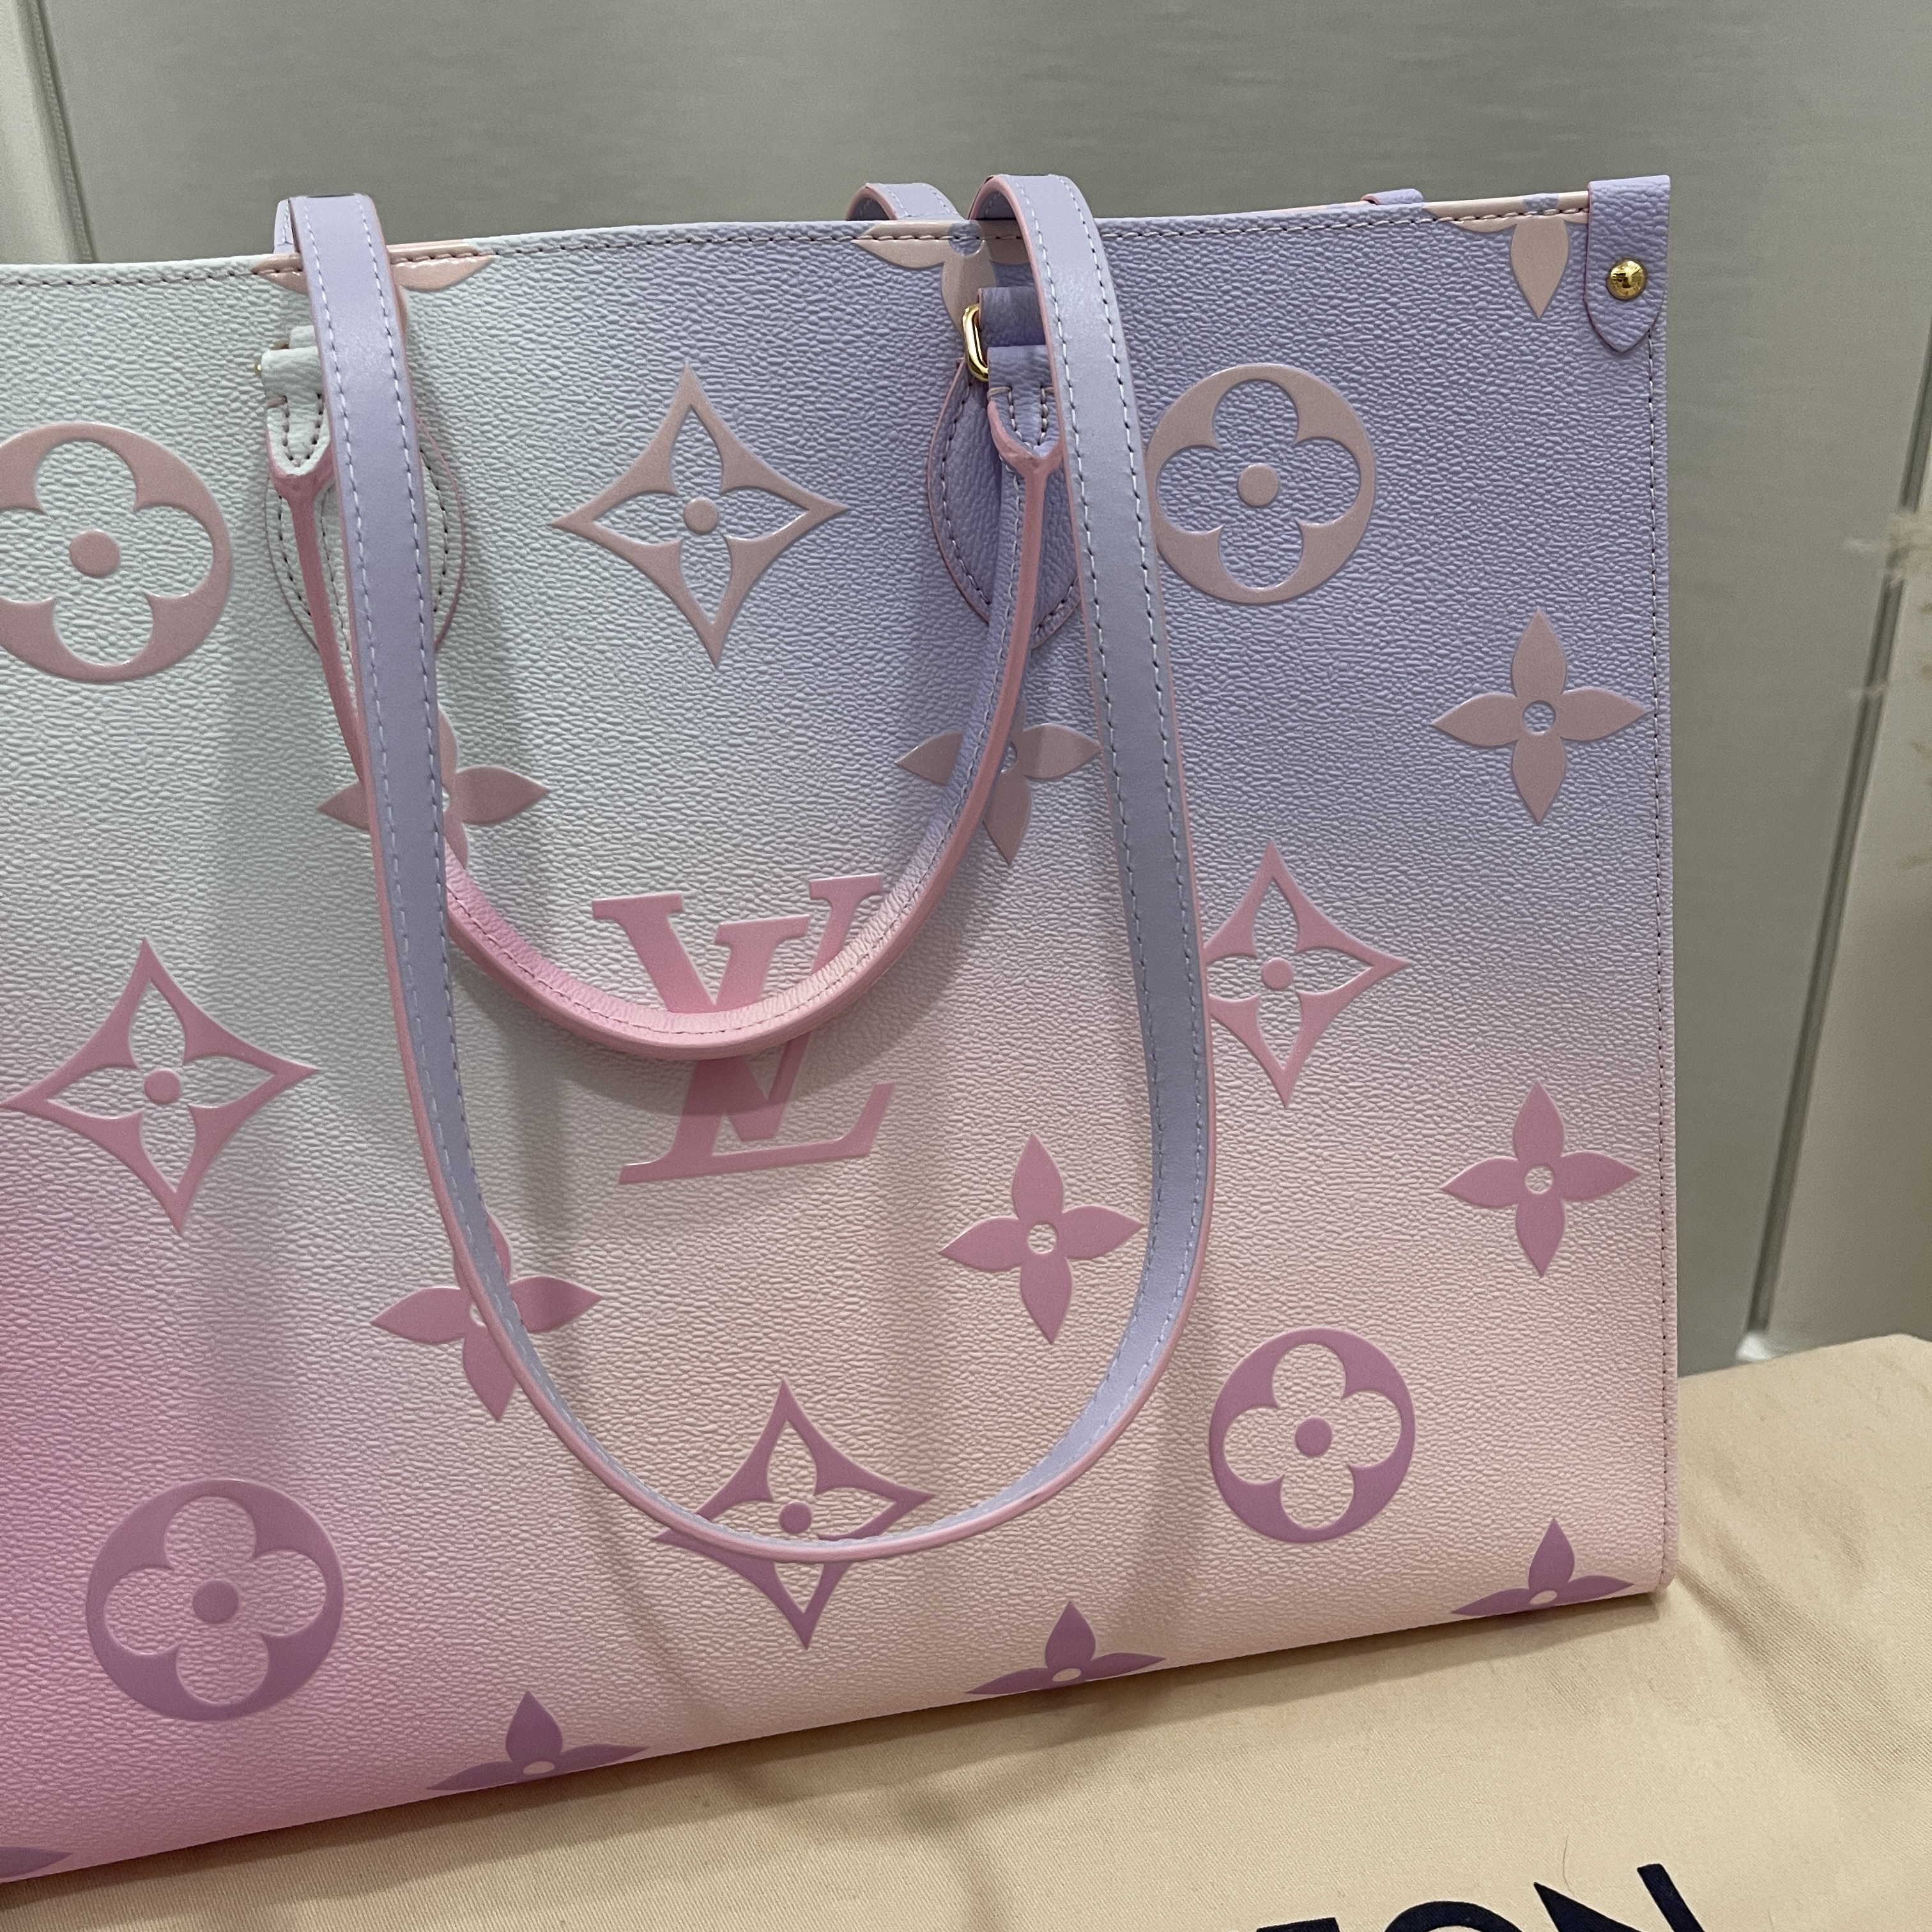 LOUIS VUITTON Monogram Giant Spring In The City Onthego PM Sunrise Pastel  1218763